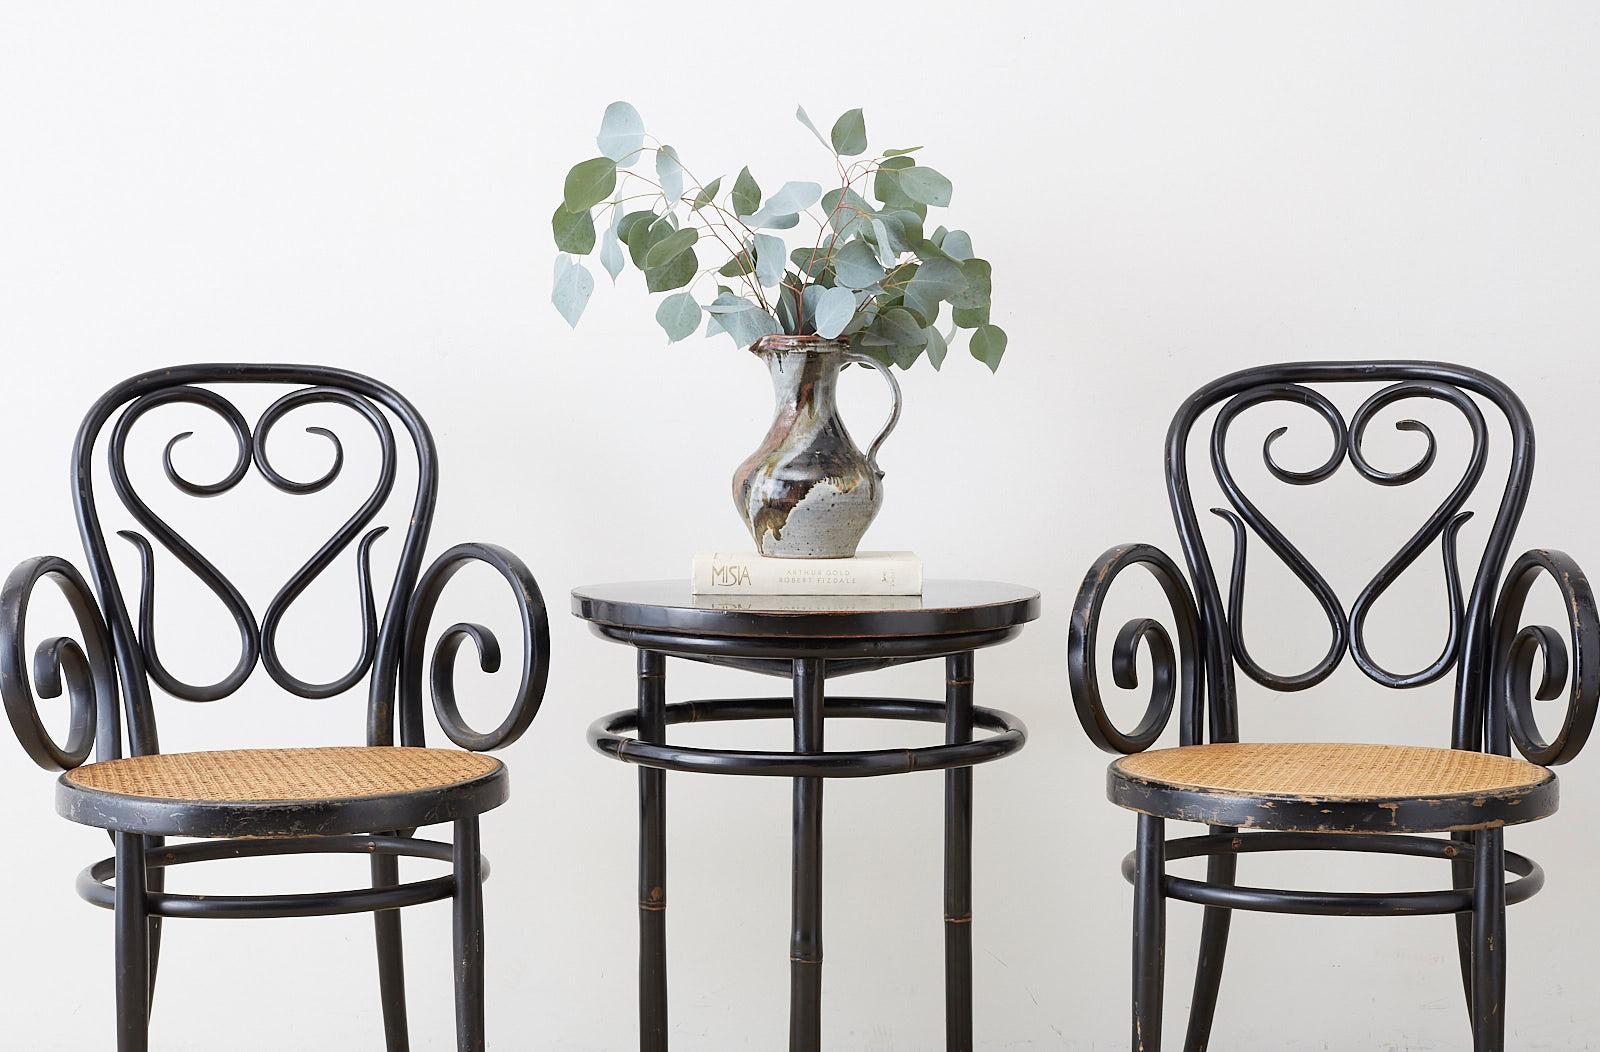 Stunning pair of Mid-Century Modern round bamboo drink tables featuring an ebonized lacquer finish. Elegant and Minimalist style with a round wood top supported by three round bamboo pole legs. The legs are conjoined by a bent bamboo ring stretcher.